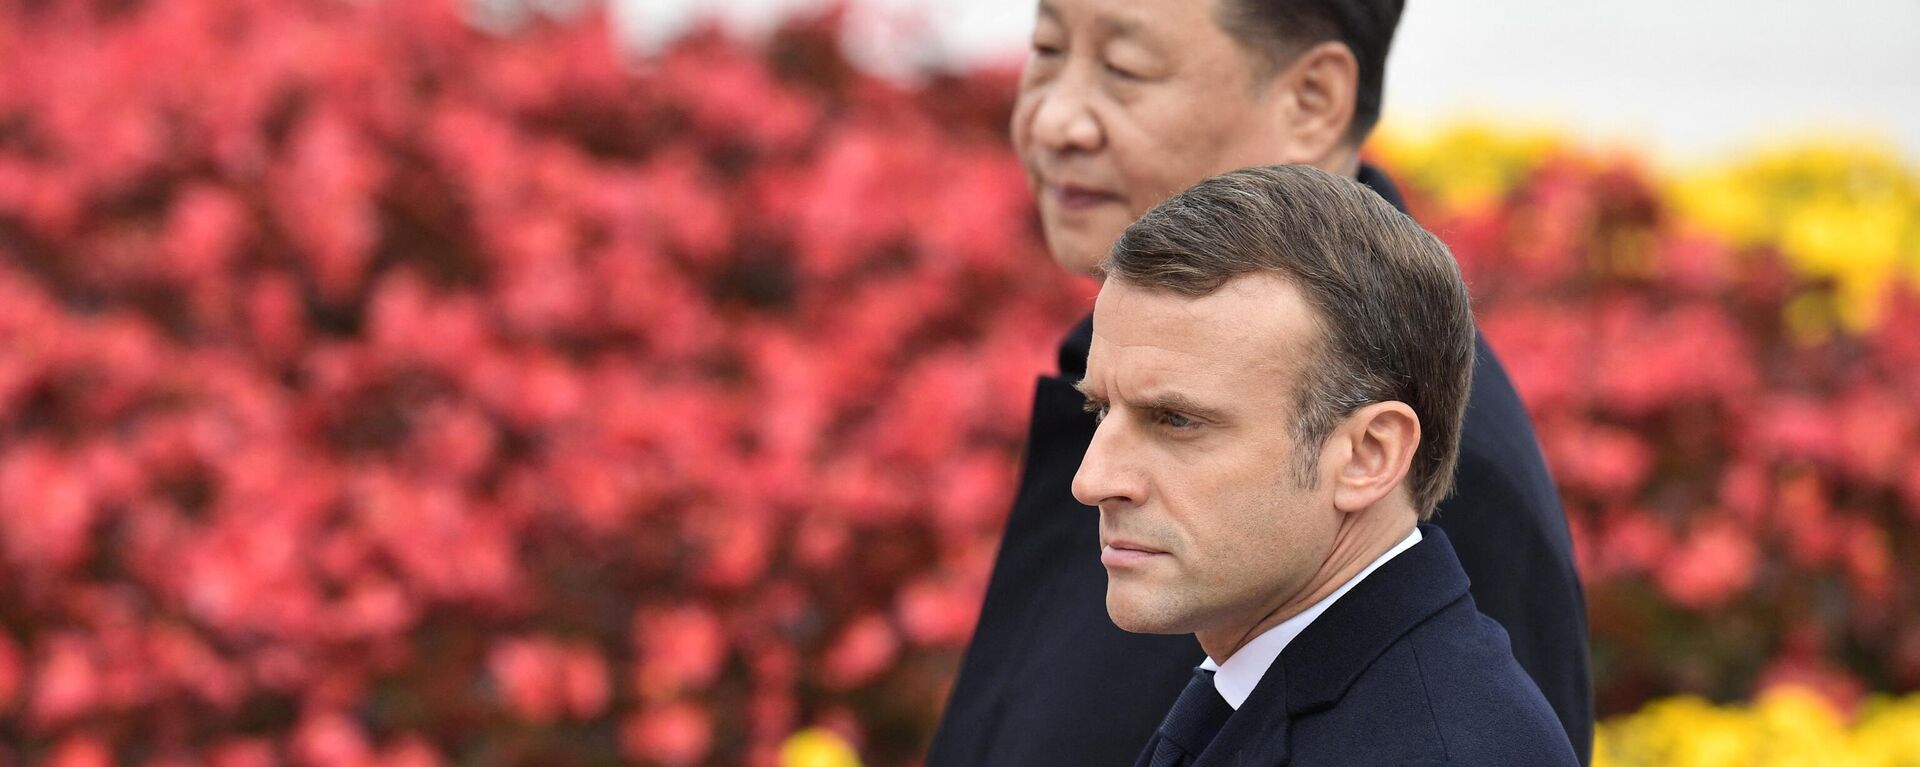 French President Emmanuel Macron walks with Chinese President Xi Jinping during a welcome ceremony at the Great Hall of the People in Beijing, in November 2019. - Sputnik International, 1920, 04.04.2023